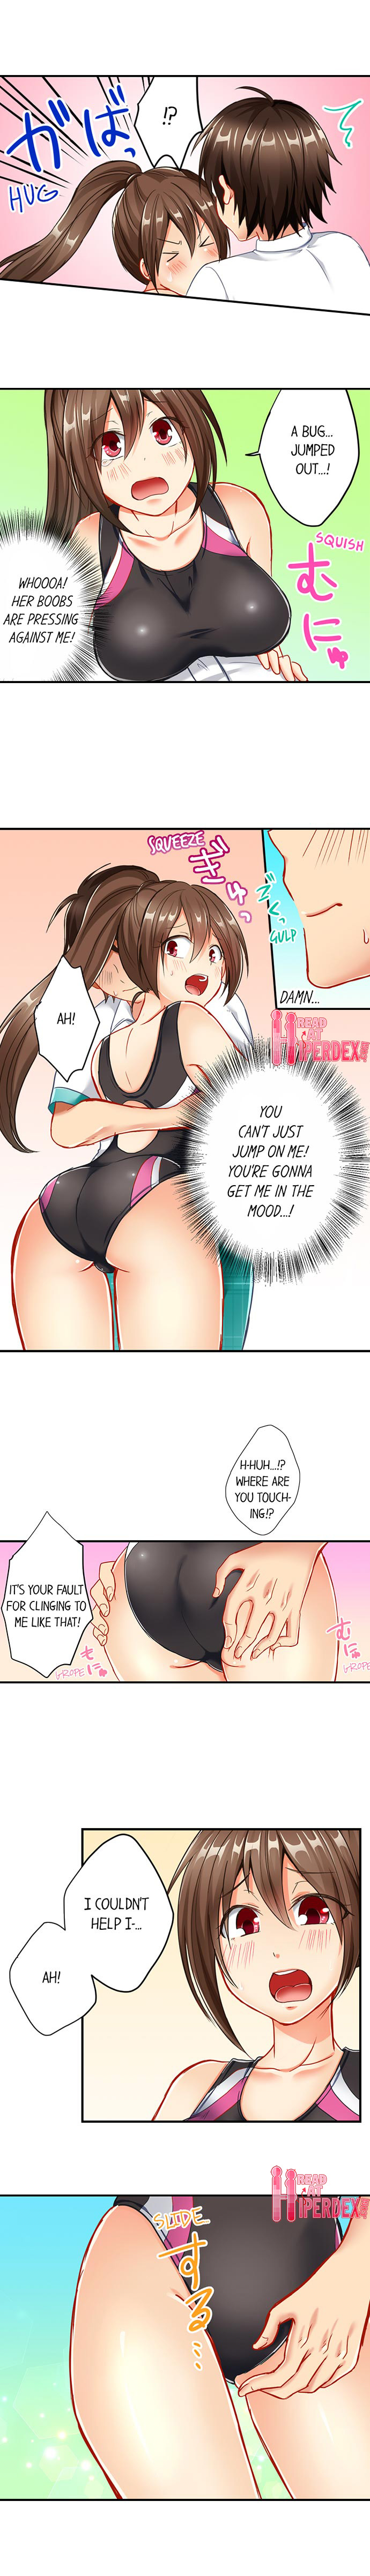 80% of the Swimming Club Girls Are Shaved - Chapter 3 Page 9